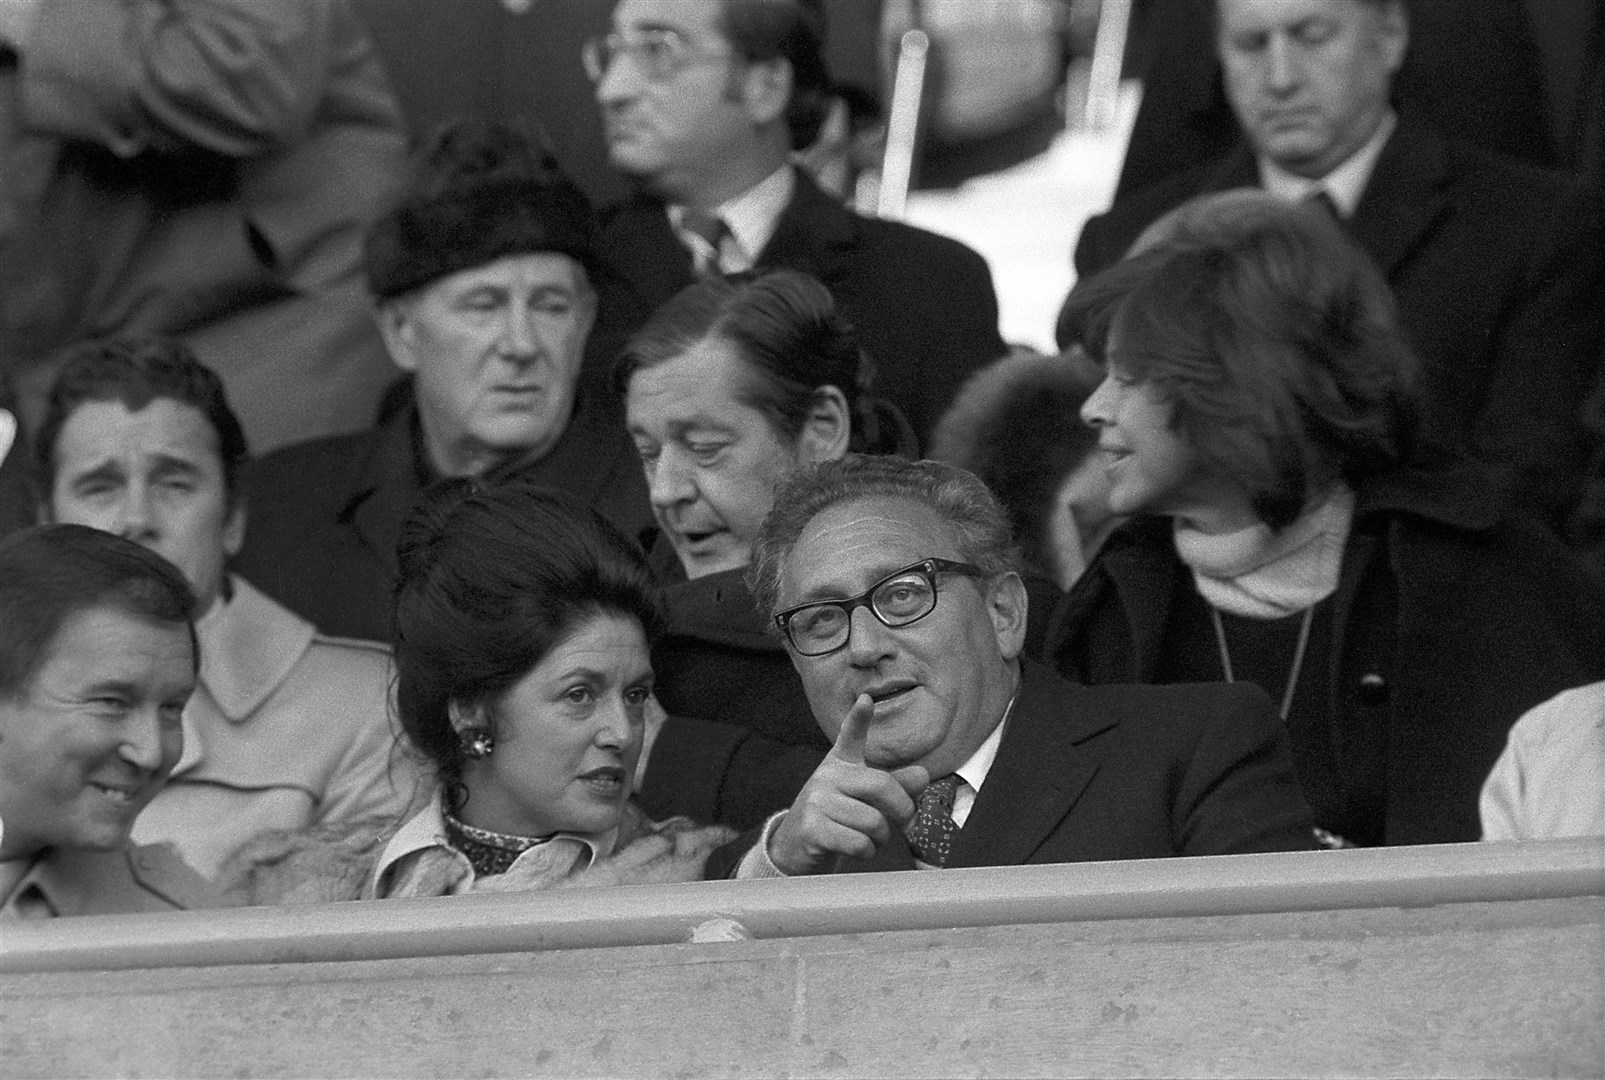 Talking football with the wife of former Chelsea chairman Brian Mears during a match at Stamford Bridge in 1976 (PA)